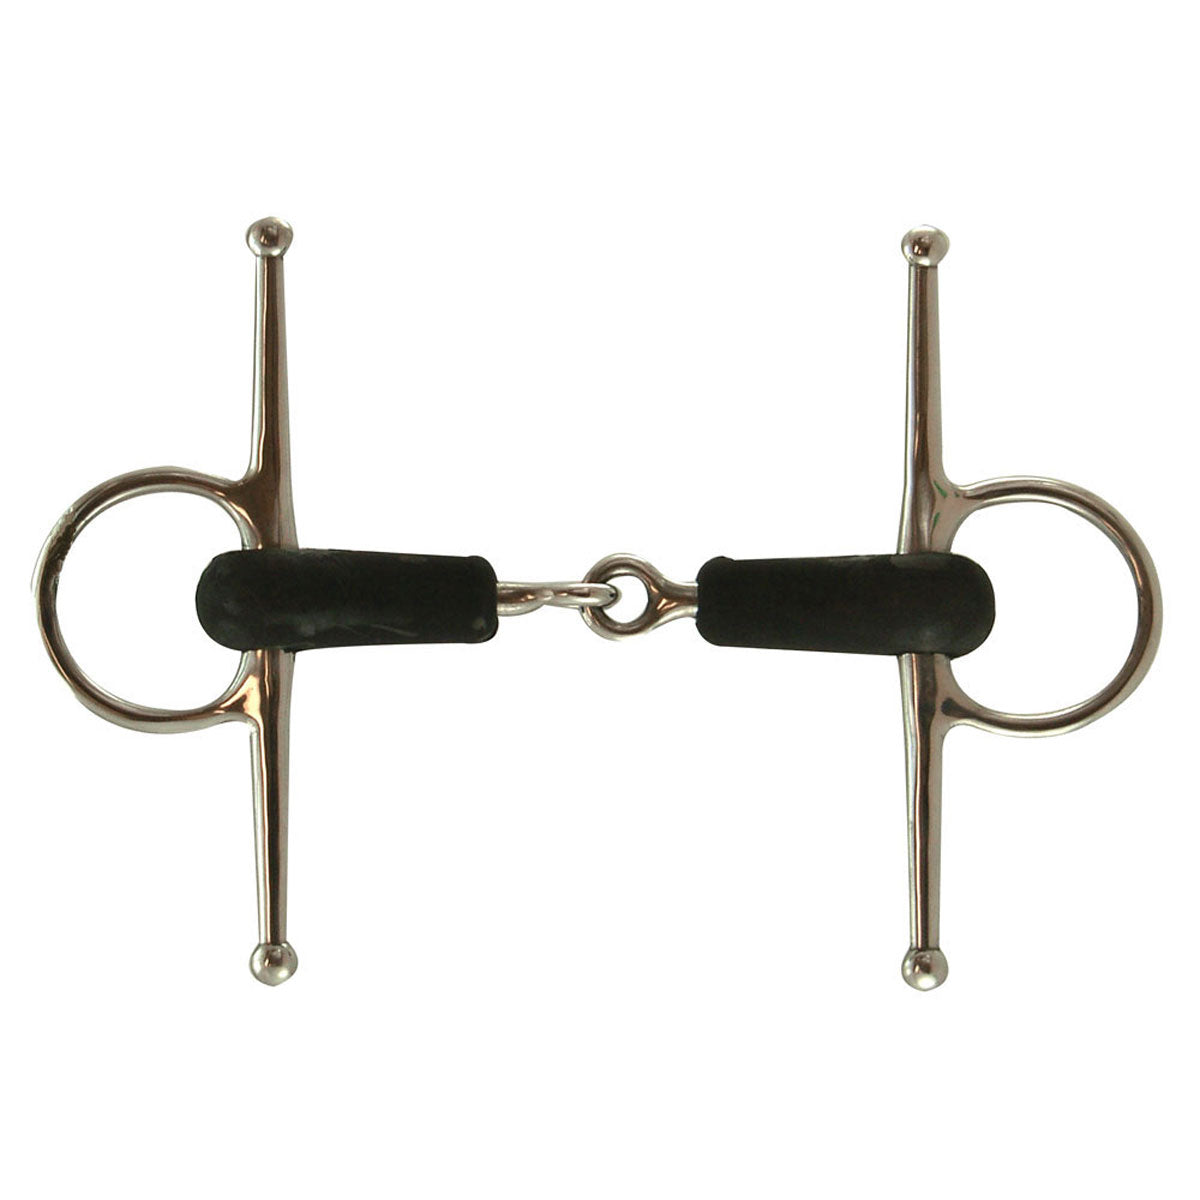 Full Cheek Stainless Steel Soft Rubber Mouth Snaffle Bit with 6-1/2" Cheeks